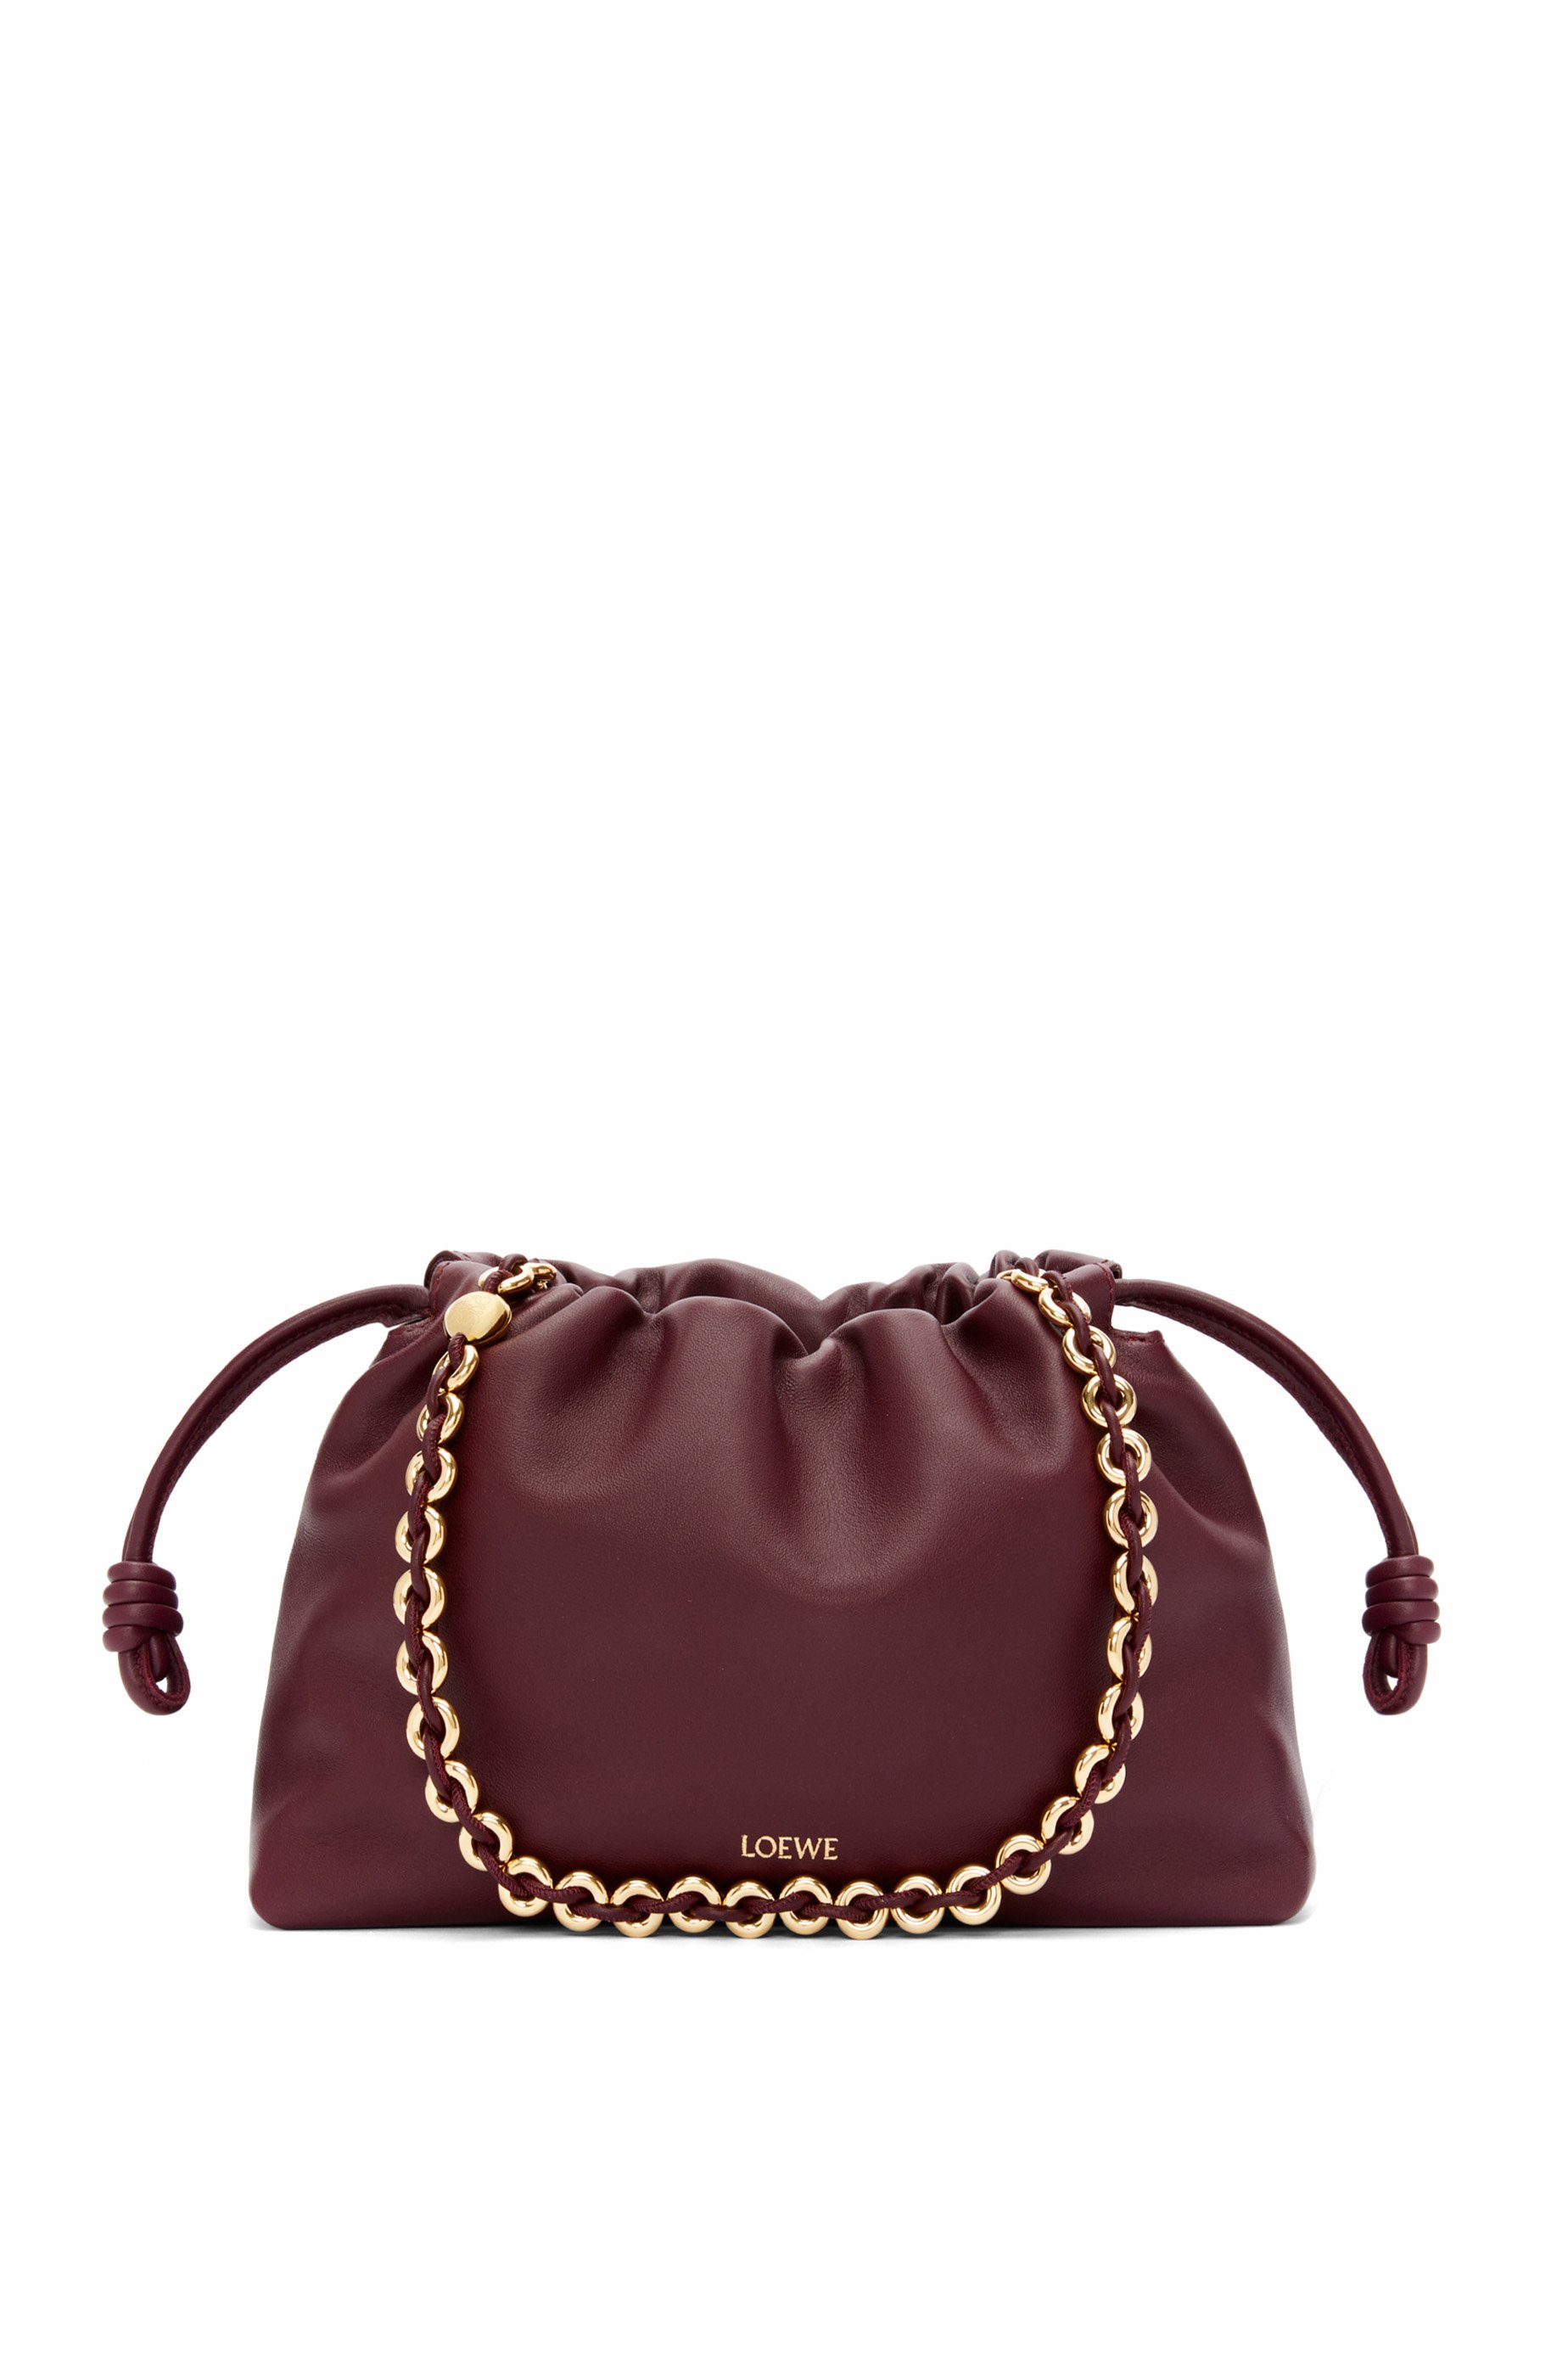 Purses | New Trends Collection Online | SHEIN Canada